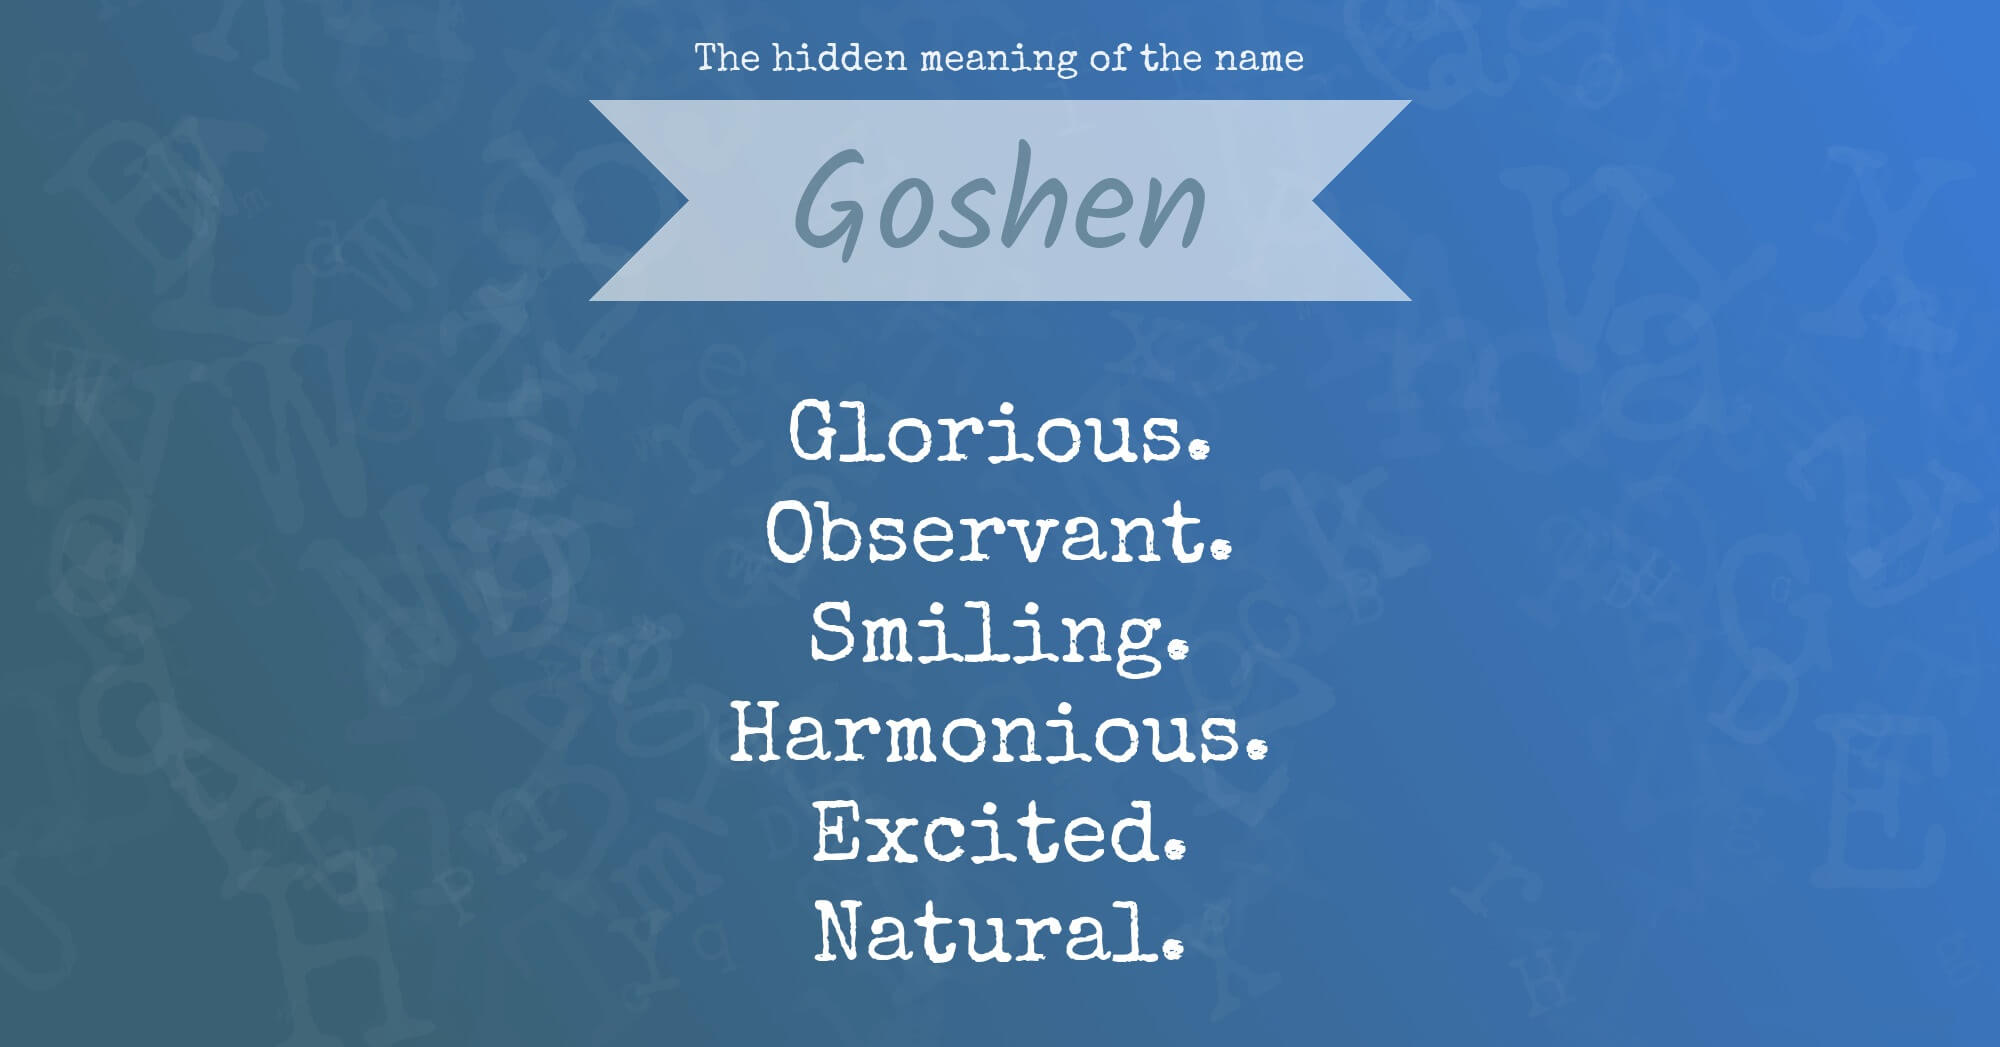 The Hidden Meaning of The Name Goshen